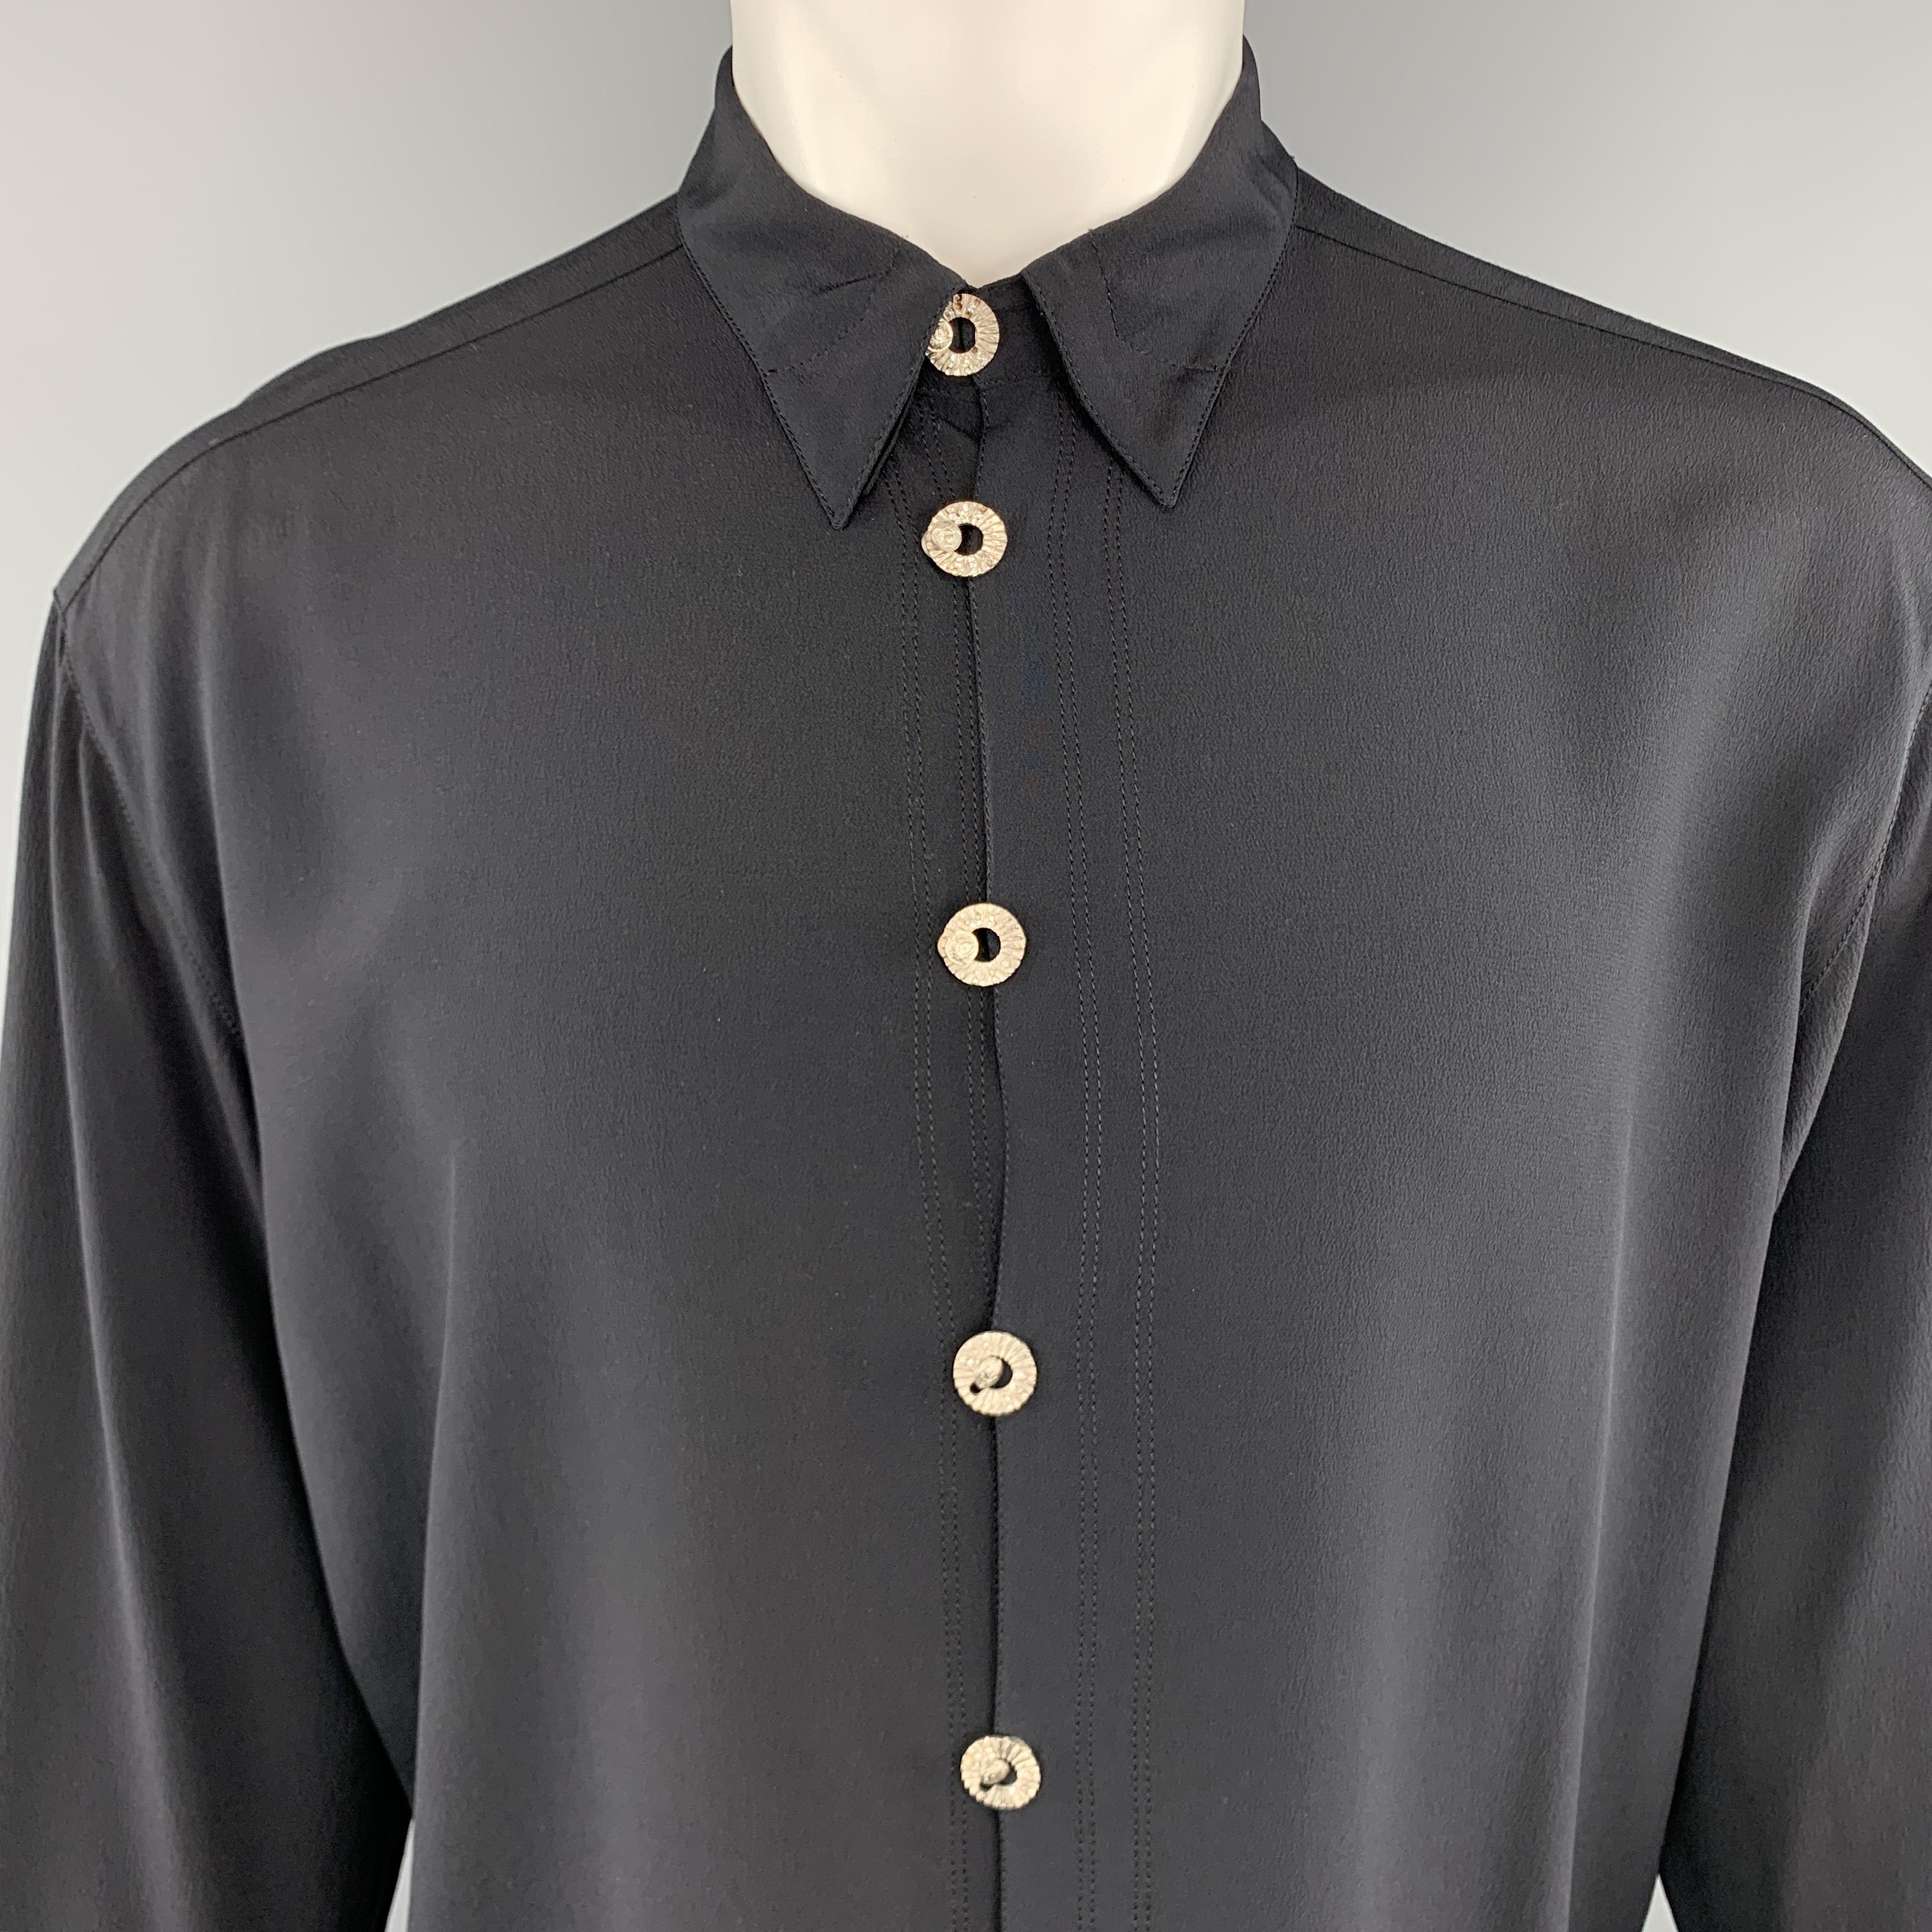 Vintage GIANNI VERSACE shirt comes in b;ack silk crepe with a pointed hidden button down collar, oversized fit, and silver tone rhinestoned medusa hook eye closures. Missing some stones. As-is. Made in Italy.

Very Good Pre-Owned Condition.
Marked: